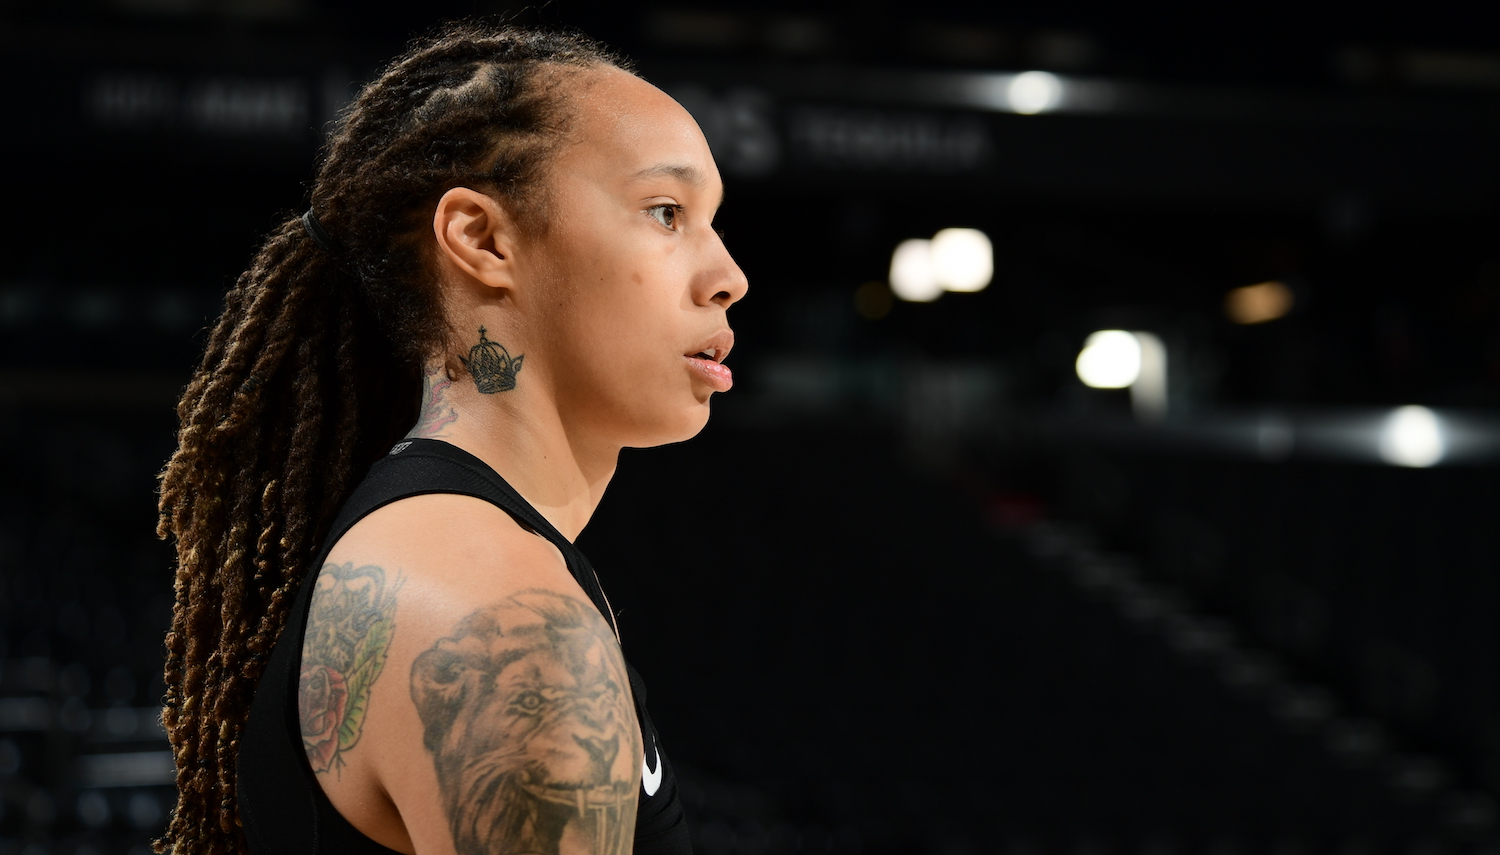 PHOENIX, AZ - OCTOBER 12: A close up shot of Brittney Griner #42 of the Phoenix Mercury at practice and media availability during the 2021 WNBA Finals on October 11, 2021 at Footprint Center in Phoenix, Arizona. NOTE TO USER: User expressly acknowledges and agrees that, by downloading and or using this photograph, user is consenting to the terms and conditions of the Getty Images License Agreement. Mandatory Copyright Notice: Copyright 2021 NBAE (Photo by Michael Gonzales/NBAE via Getty Images)